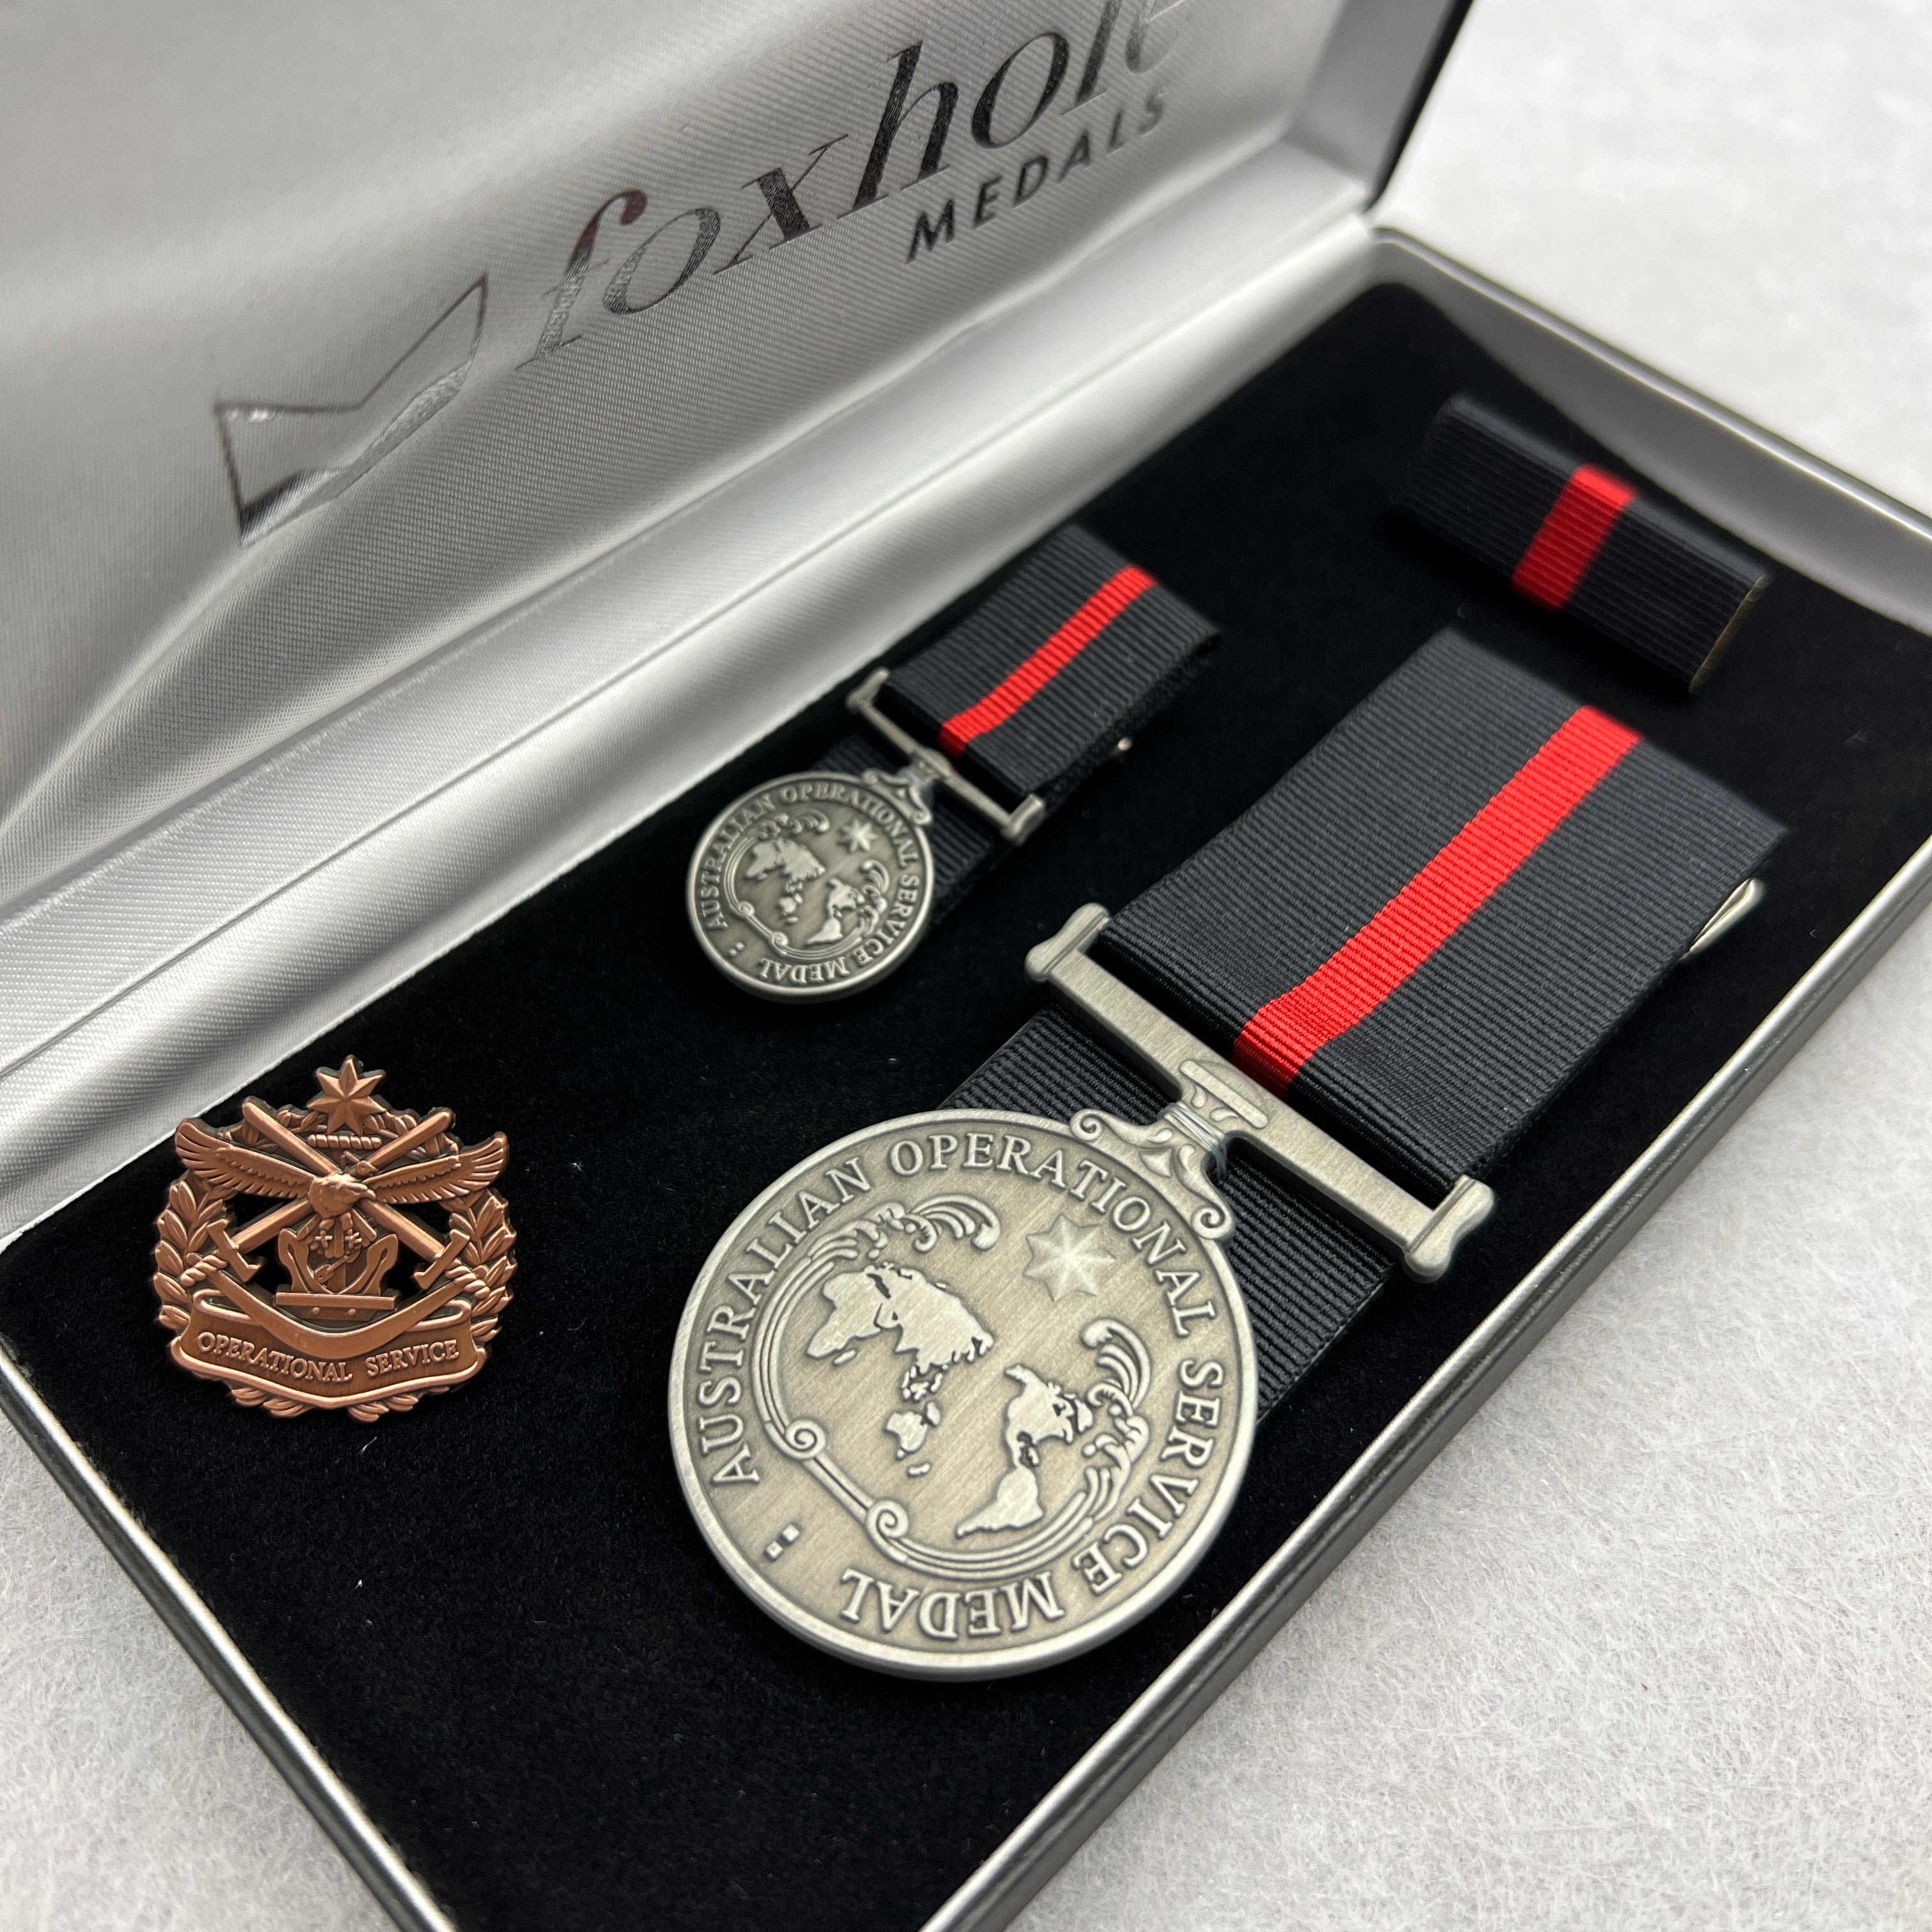 AOSM - Special Operations Medal Collection - Foxhole Medals